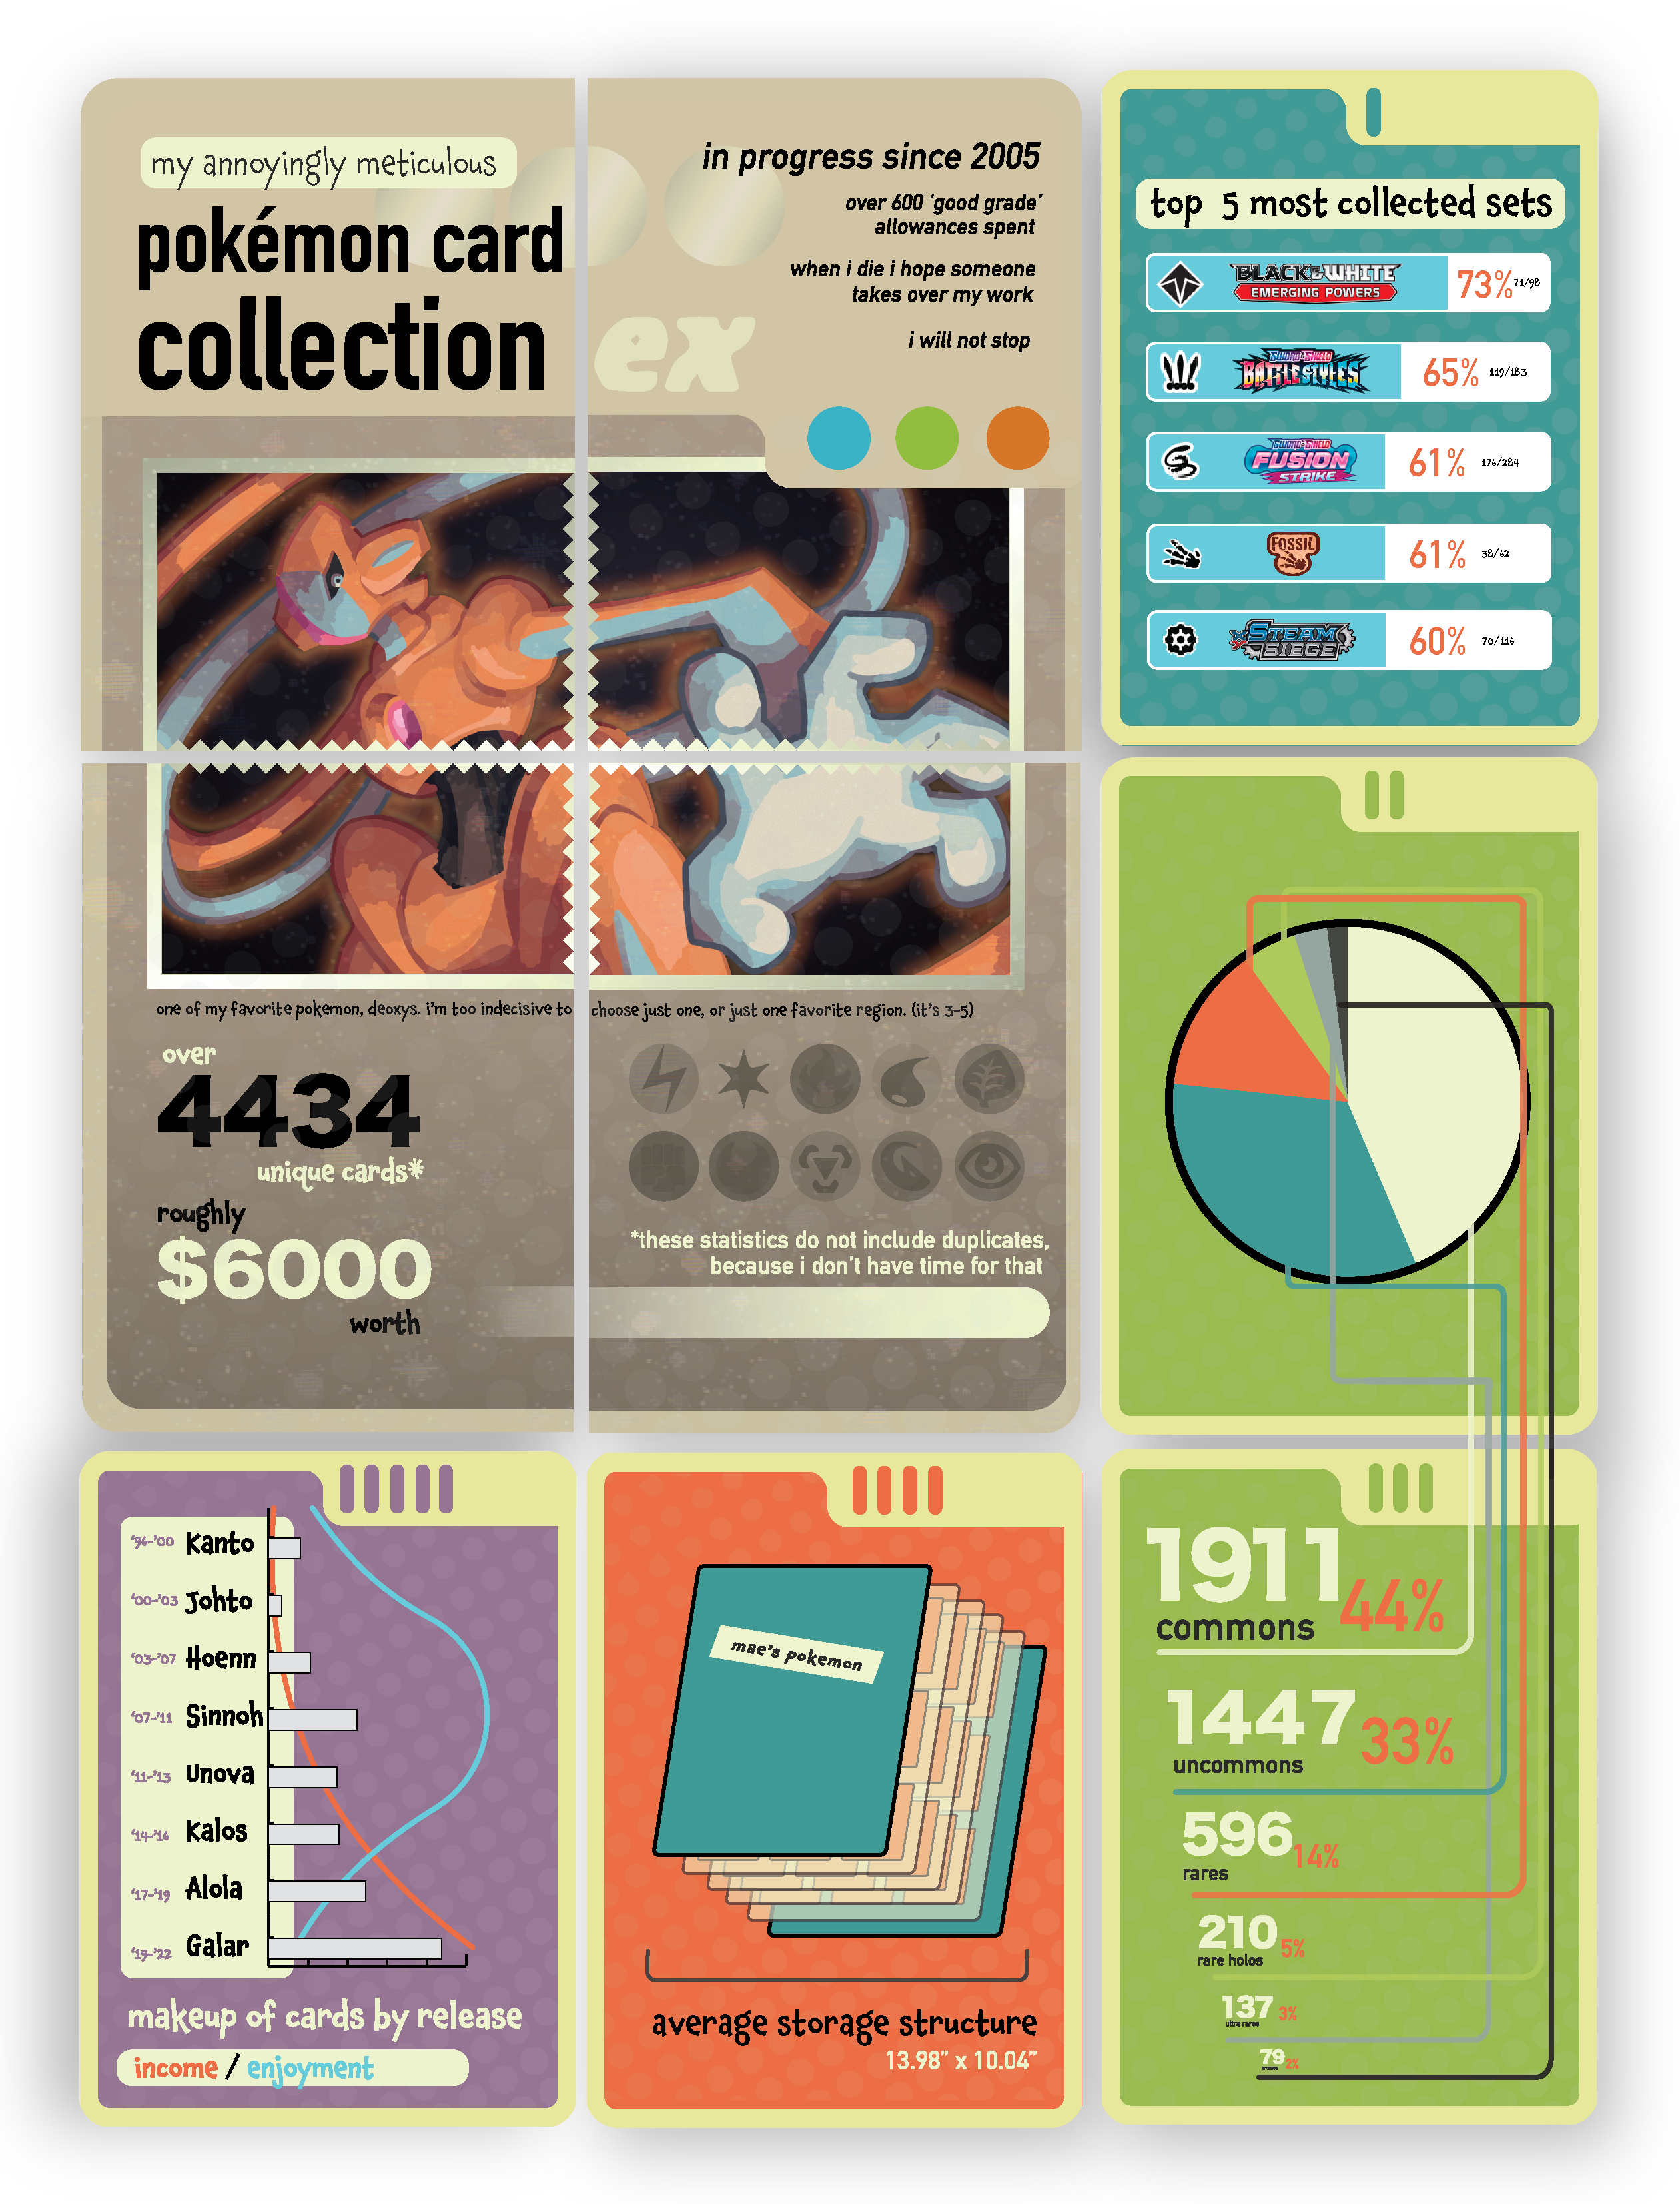 Infographic displaying statistics on my personal pokemon card collection.